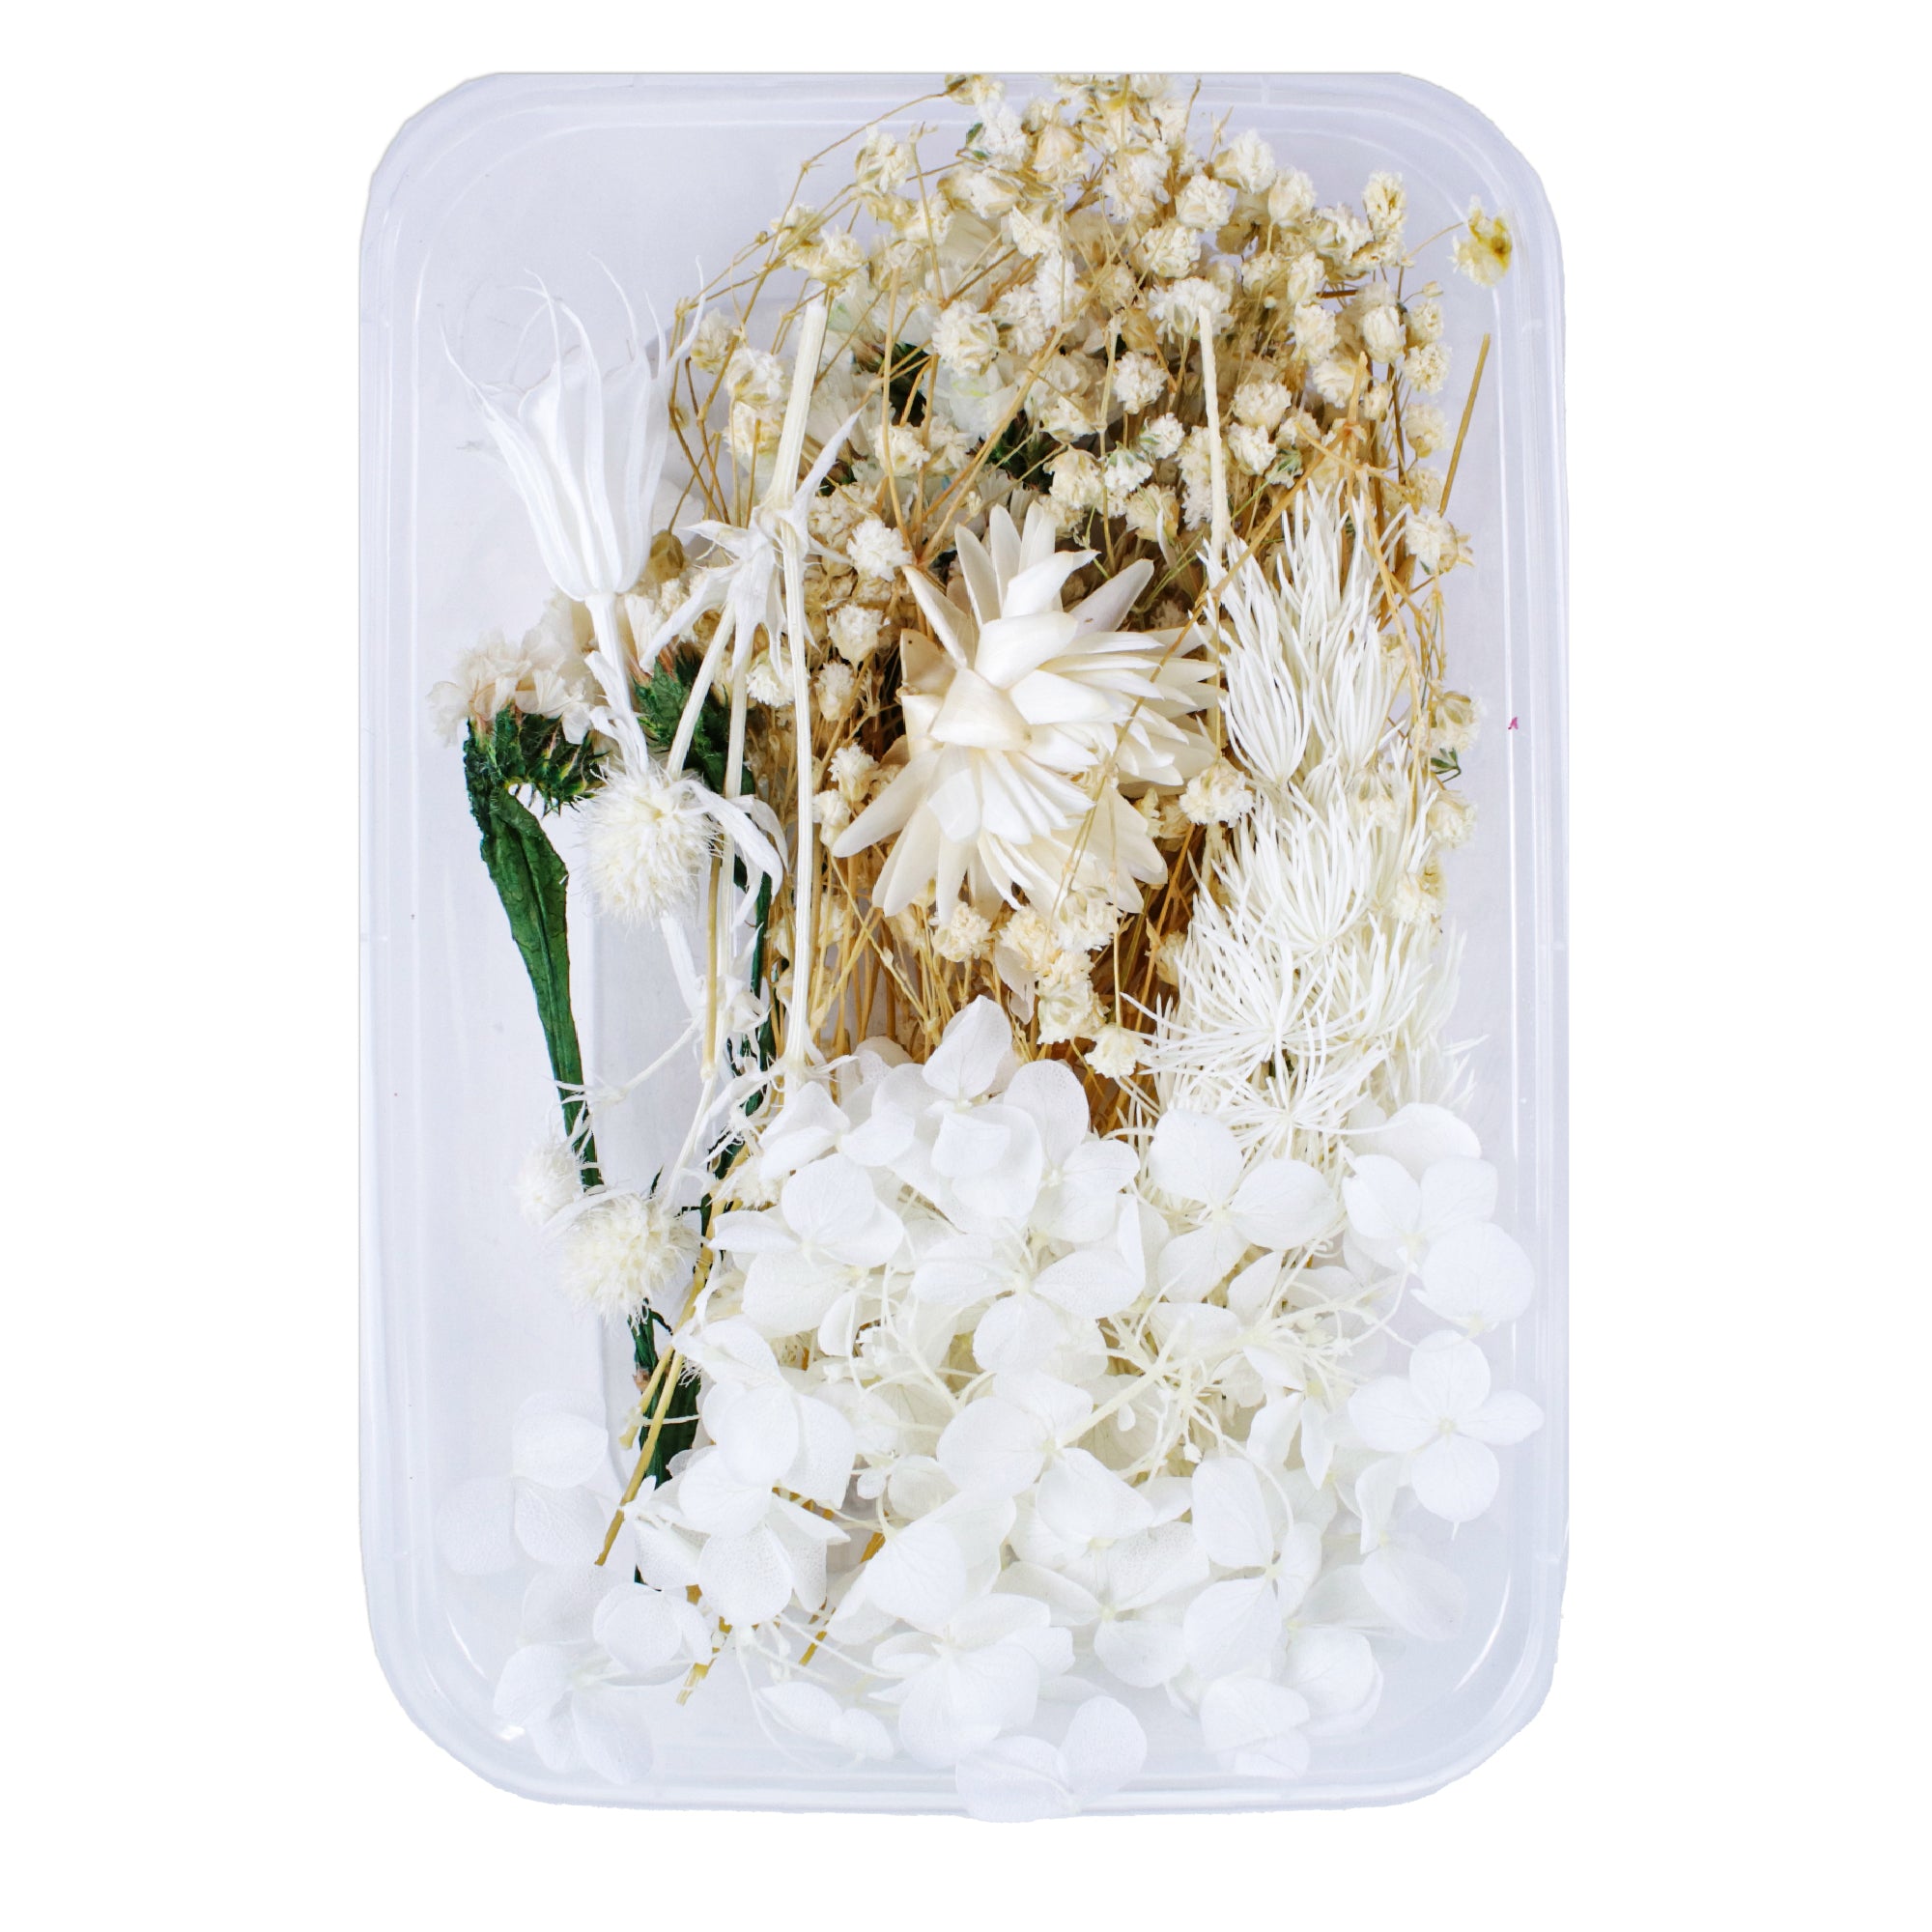 Resin Art Natural Dried Flowers Snowy Blossoms 1 Box Ib